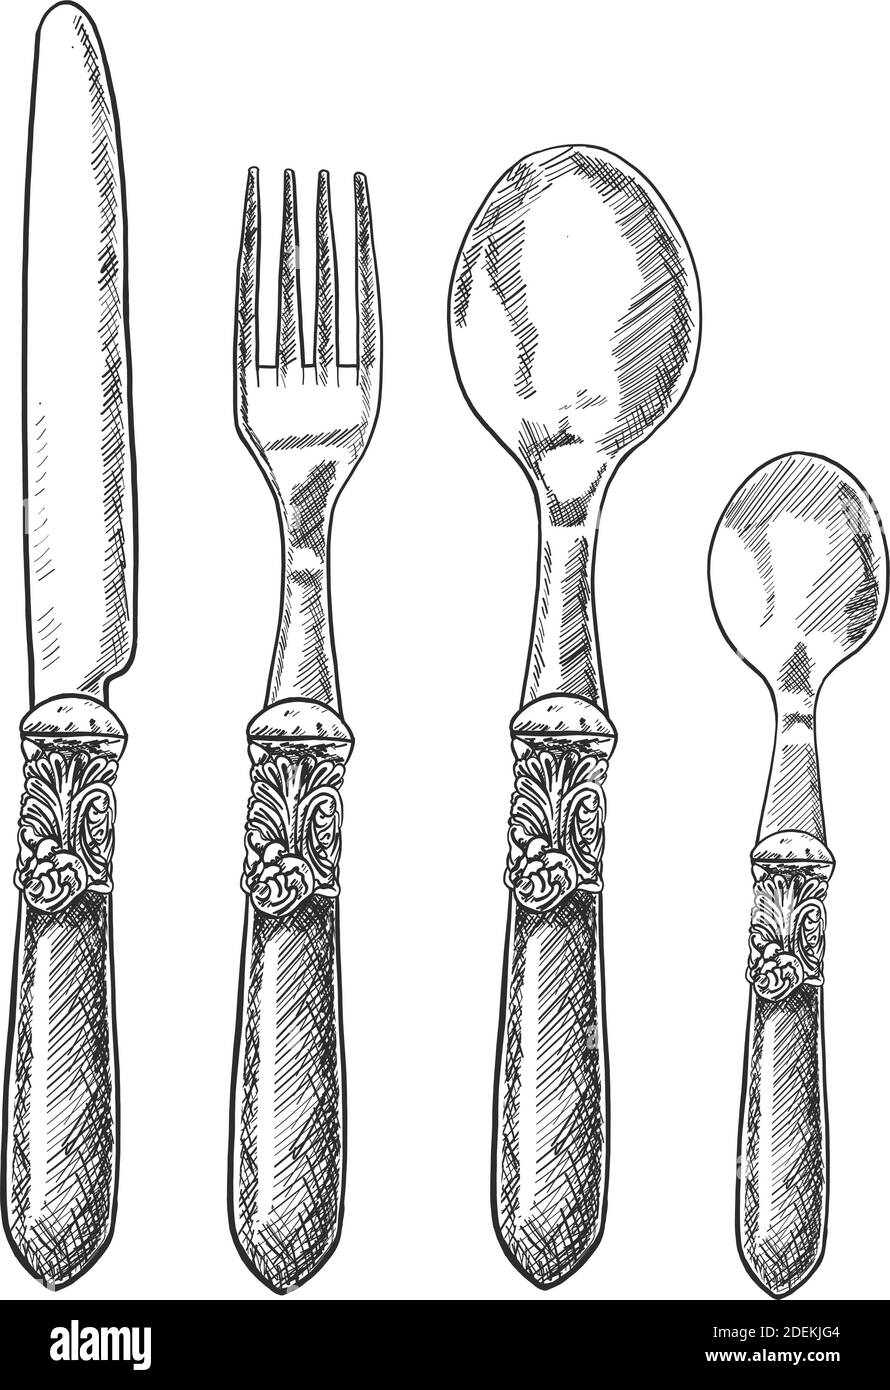 Vector hand drawn vintage cutlery set with table knife, fork, table spoon and tea spoon digital design elements for your logo, advertisement, menu, ca Stock Vector